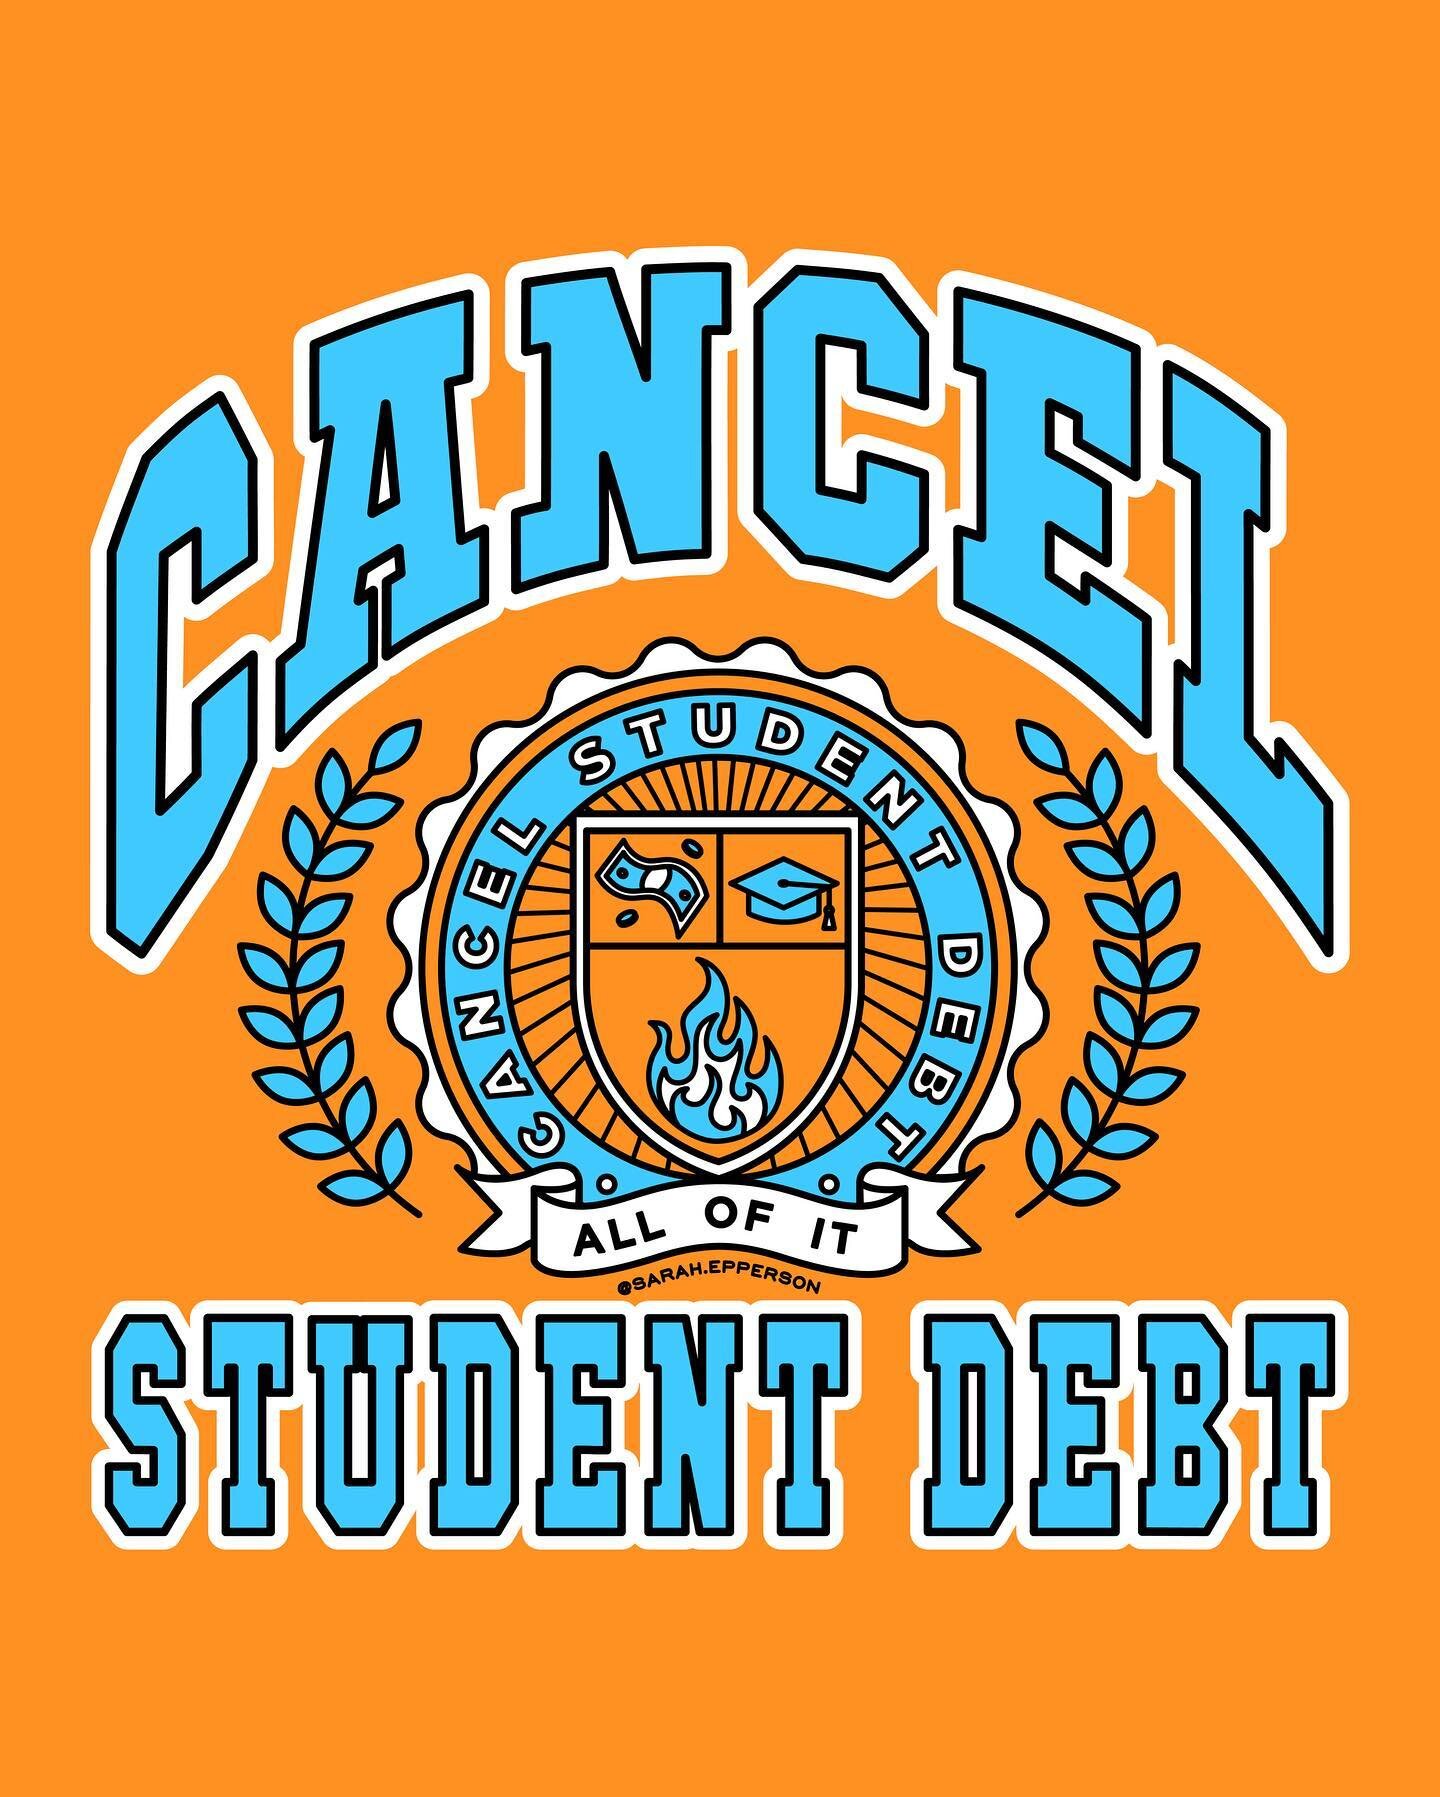 🗓1 MONTH until #StudentLoan payments restart. @POTUS Cancel Student Debt NOW!
⠀
#Biden has the power to eliminate ALL federal #StudentDebt. Tell #JoeBiden to #CancelStudentDebt NOW: 
☎️ 888-724-8946
💻 @WhiteHouse .gov/Contact
⠀
&ldquo;@POTUS has th